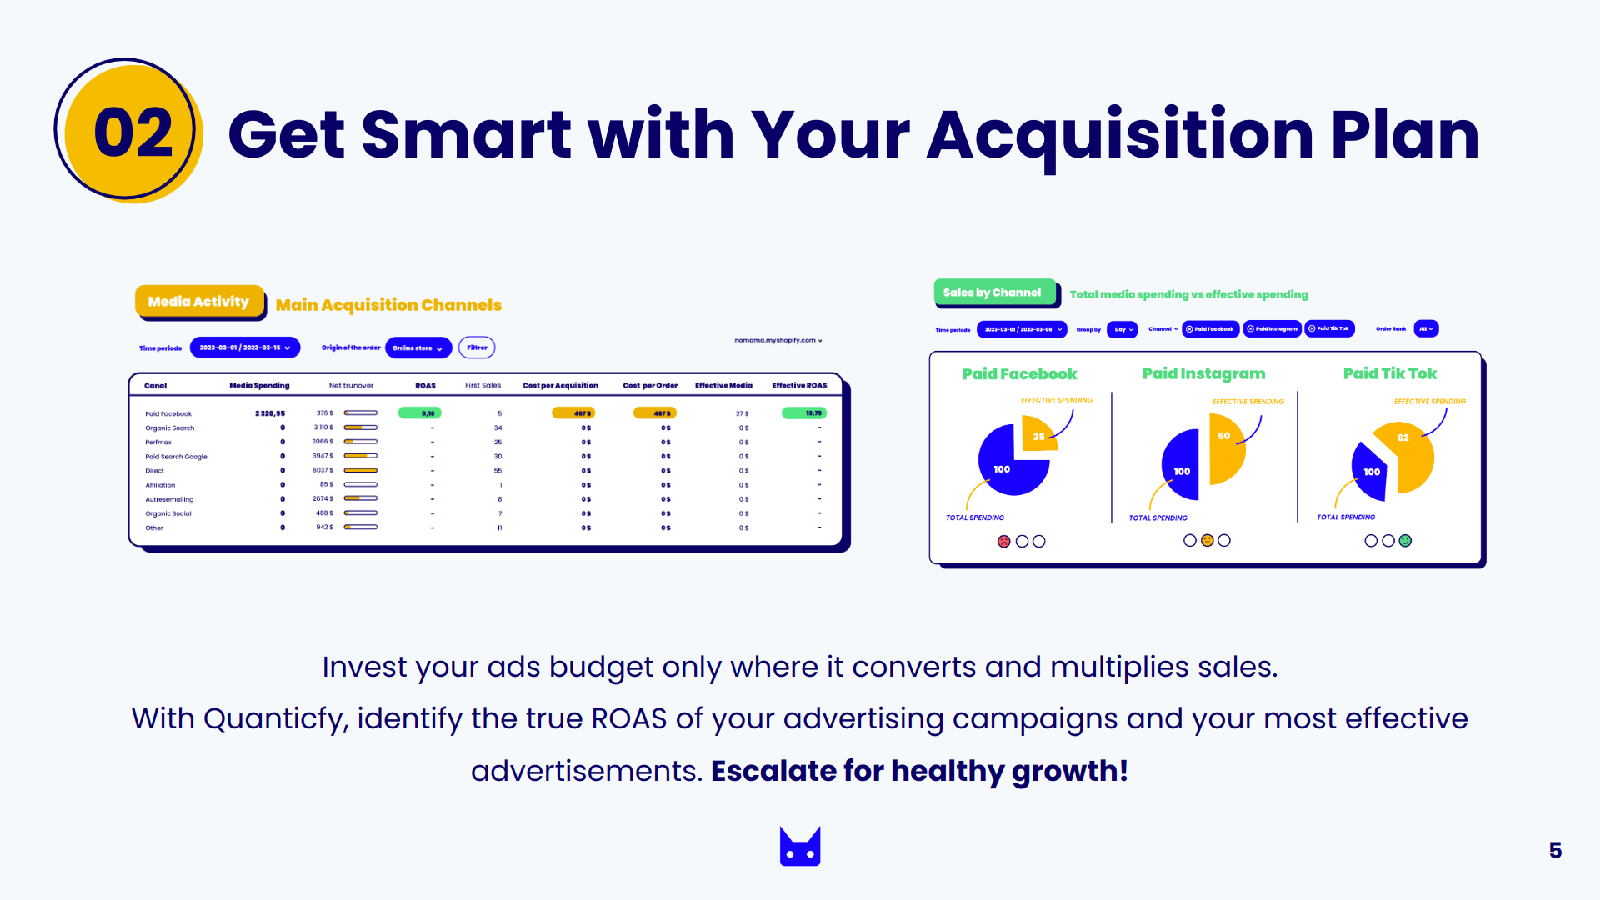 Get Smart with Your Acquisition Plan